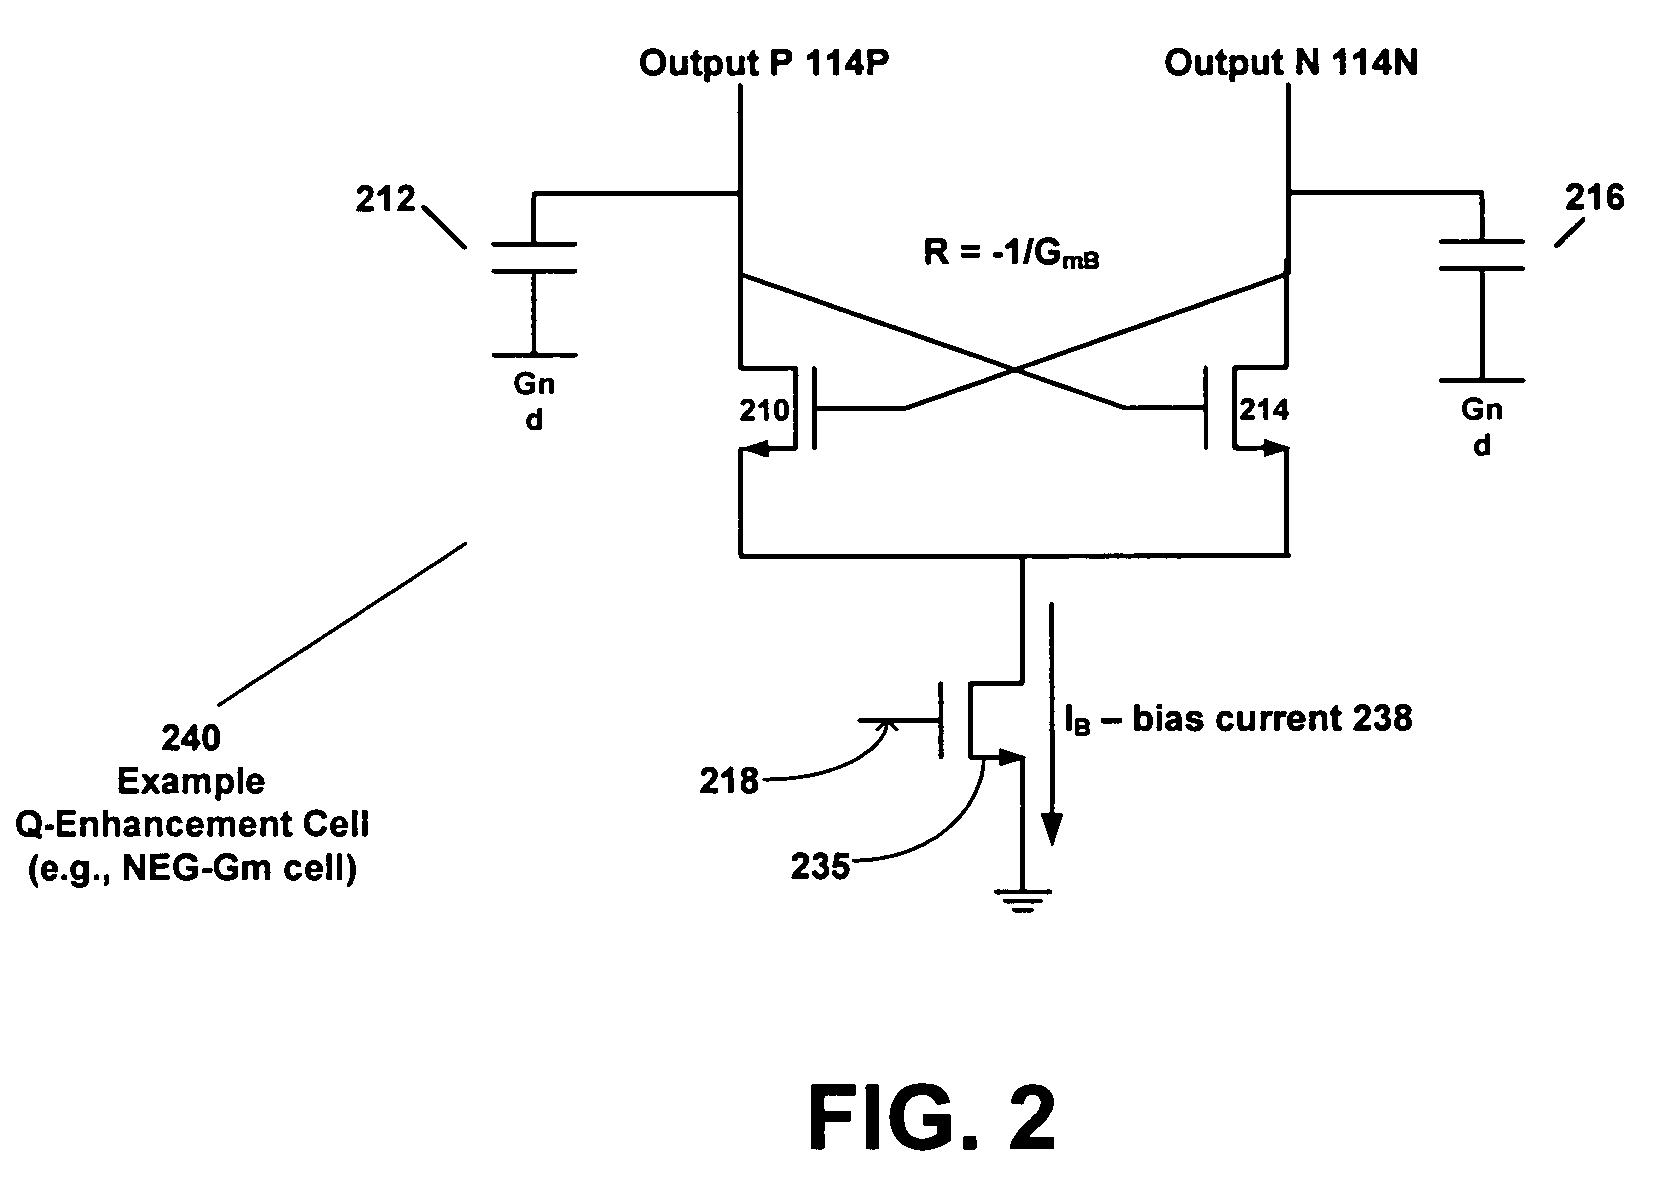 Circuit with Q-enhancement cell having feedback loop